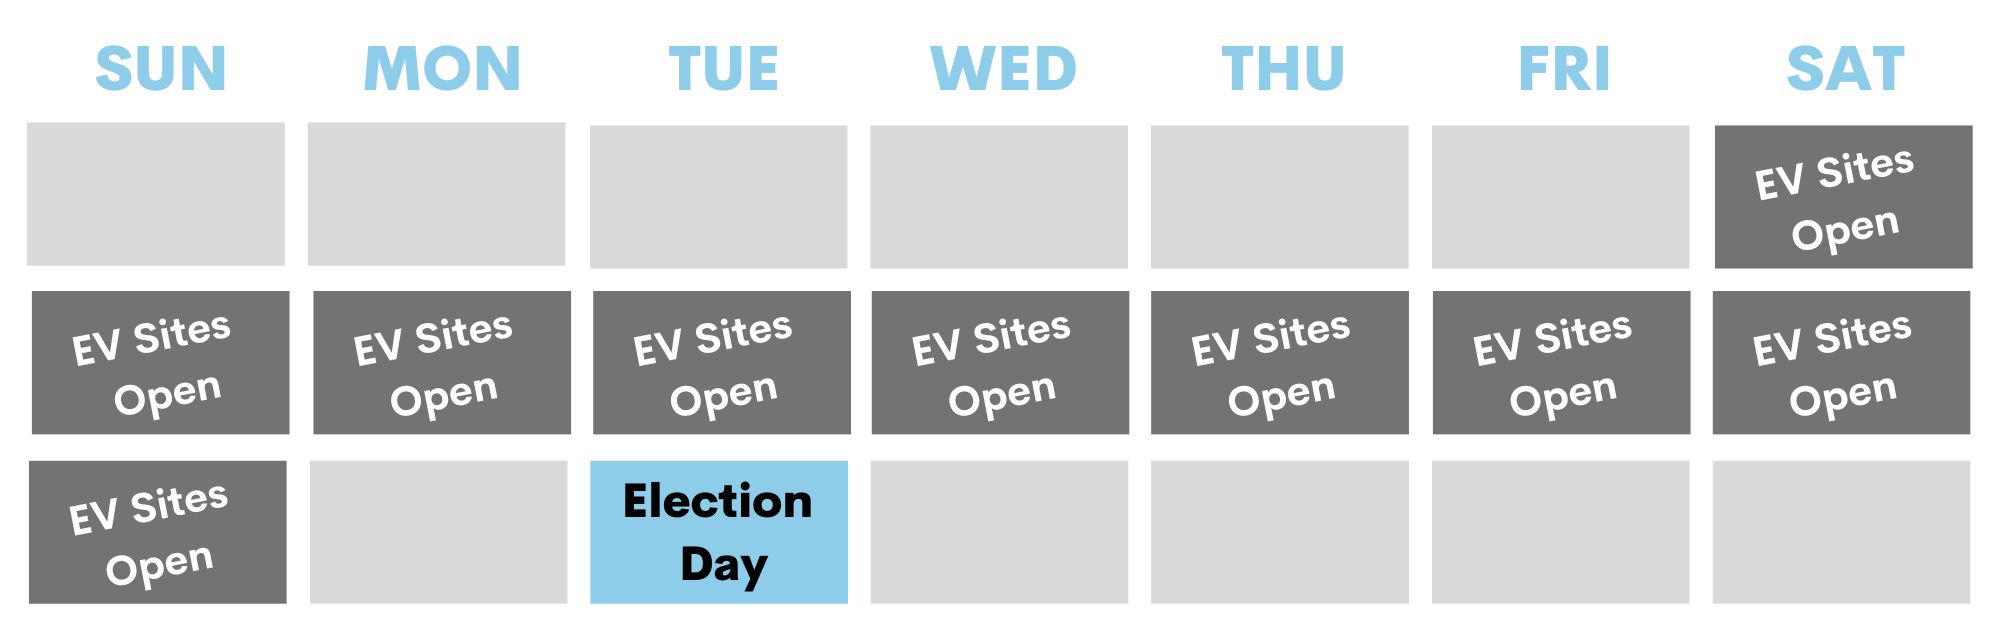 Image showing the days Early Voting Sites are open in relation to election day. 